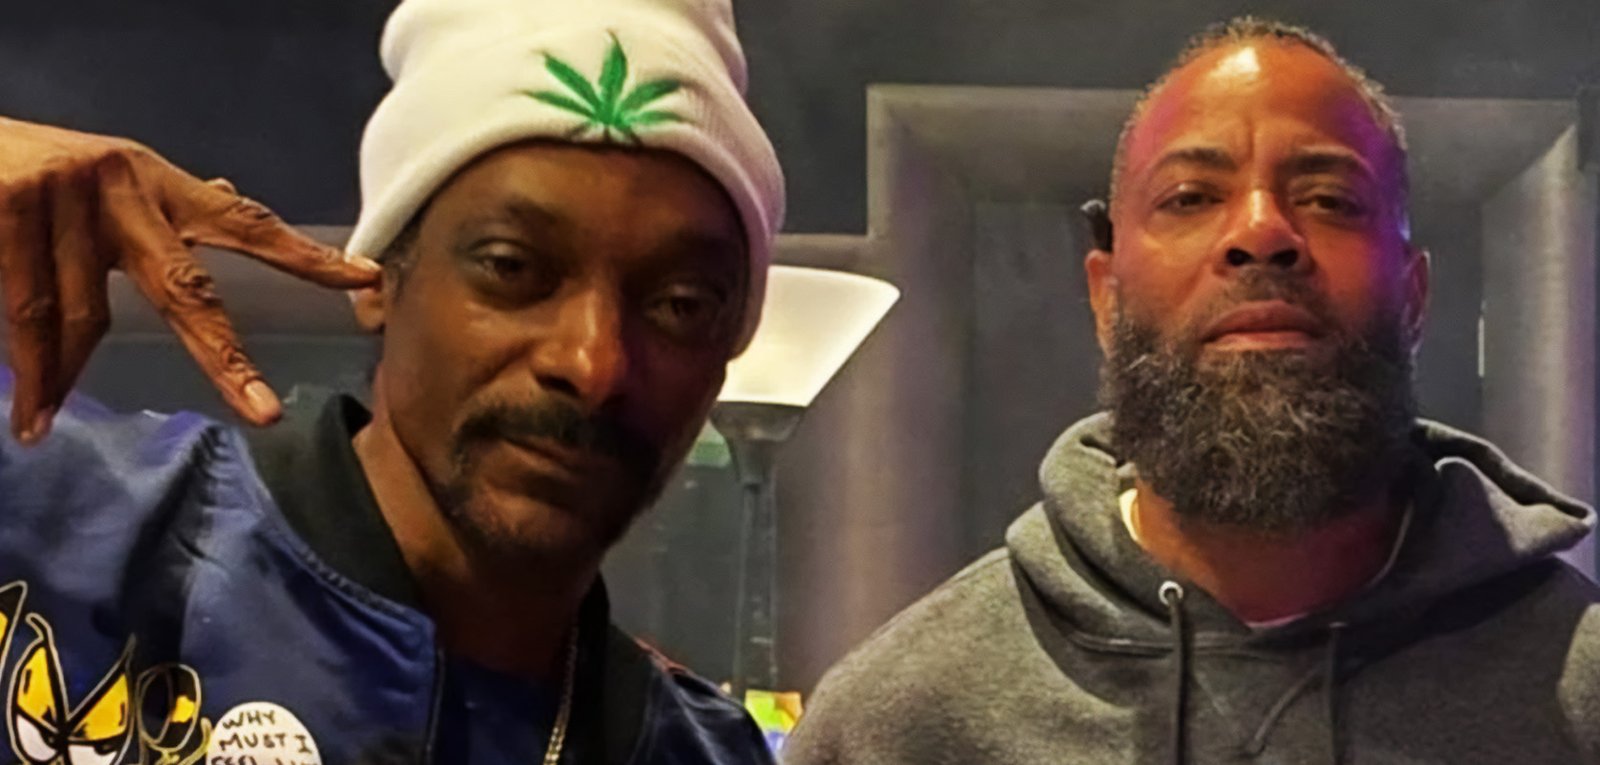 Snoop Dogg and The D.O.C.